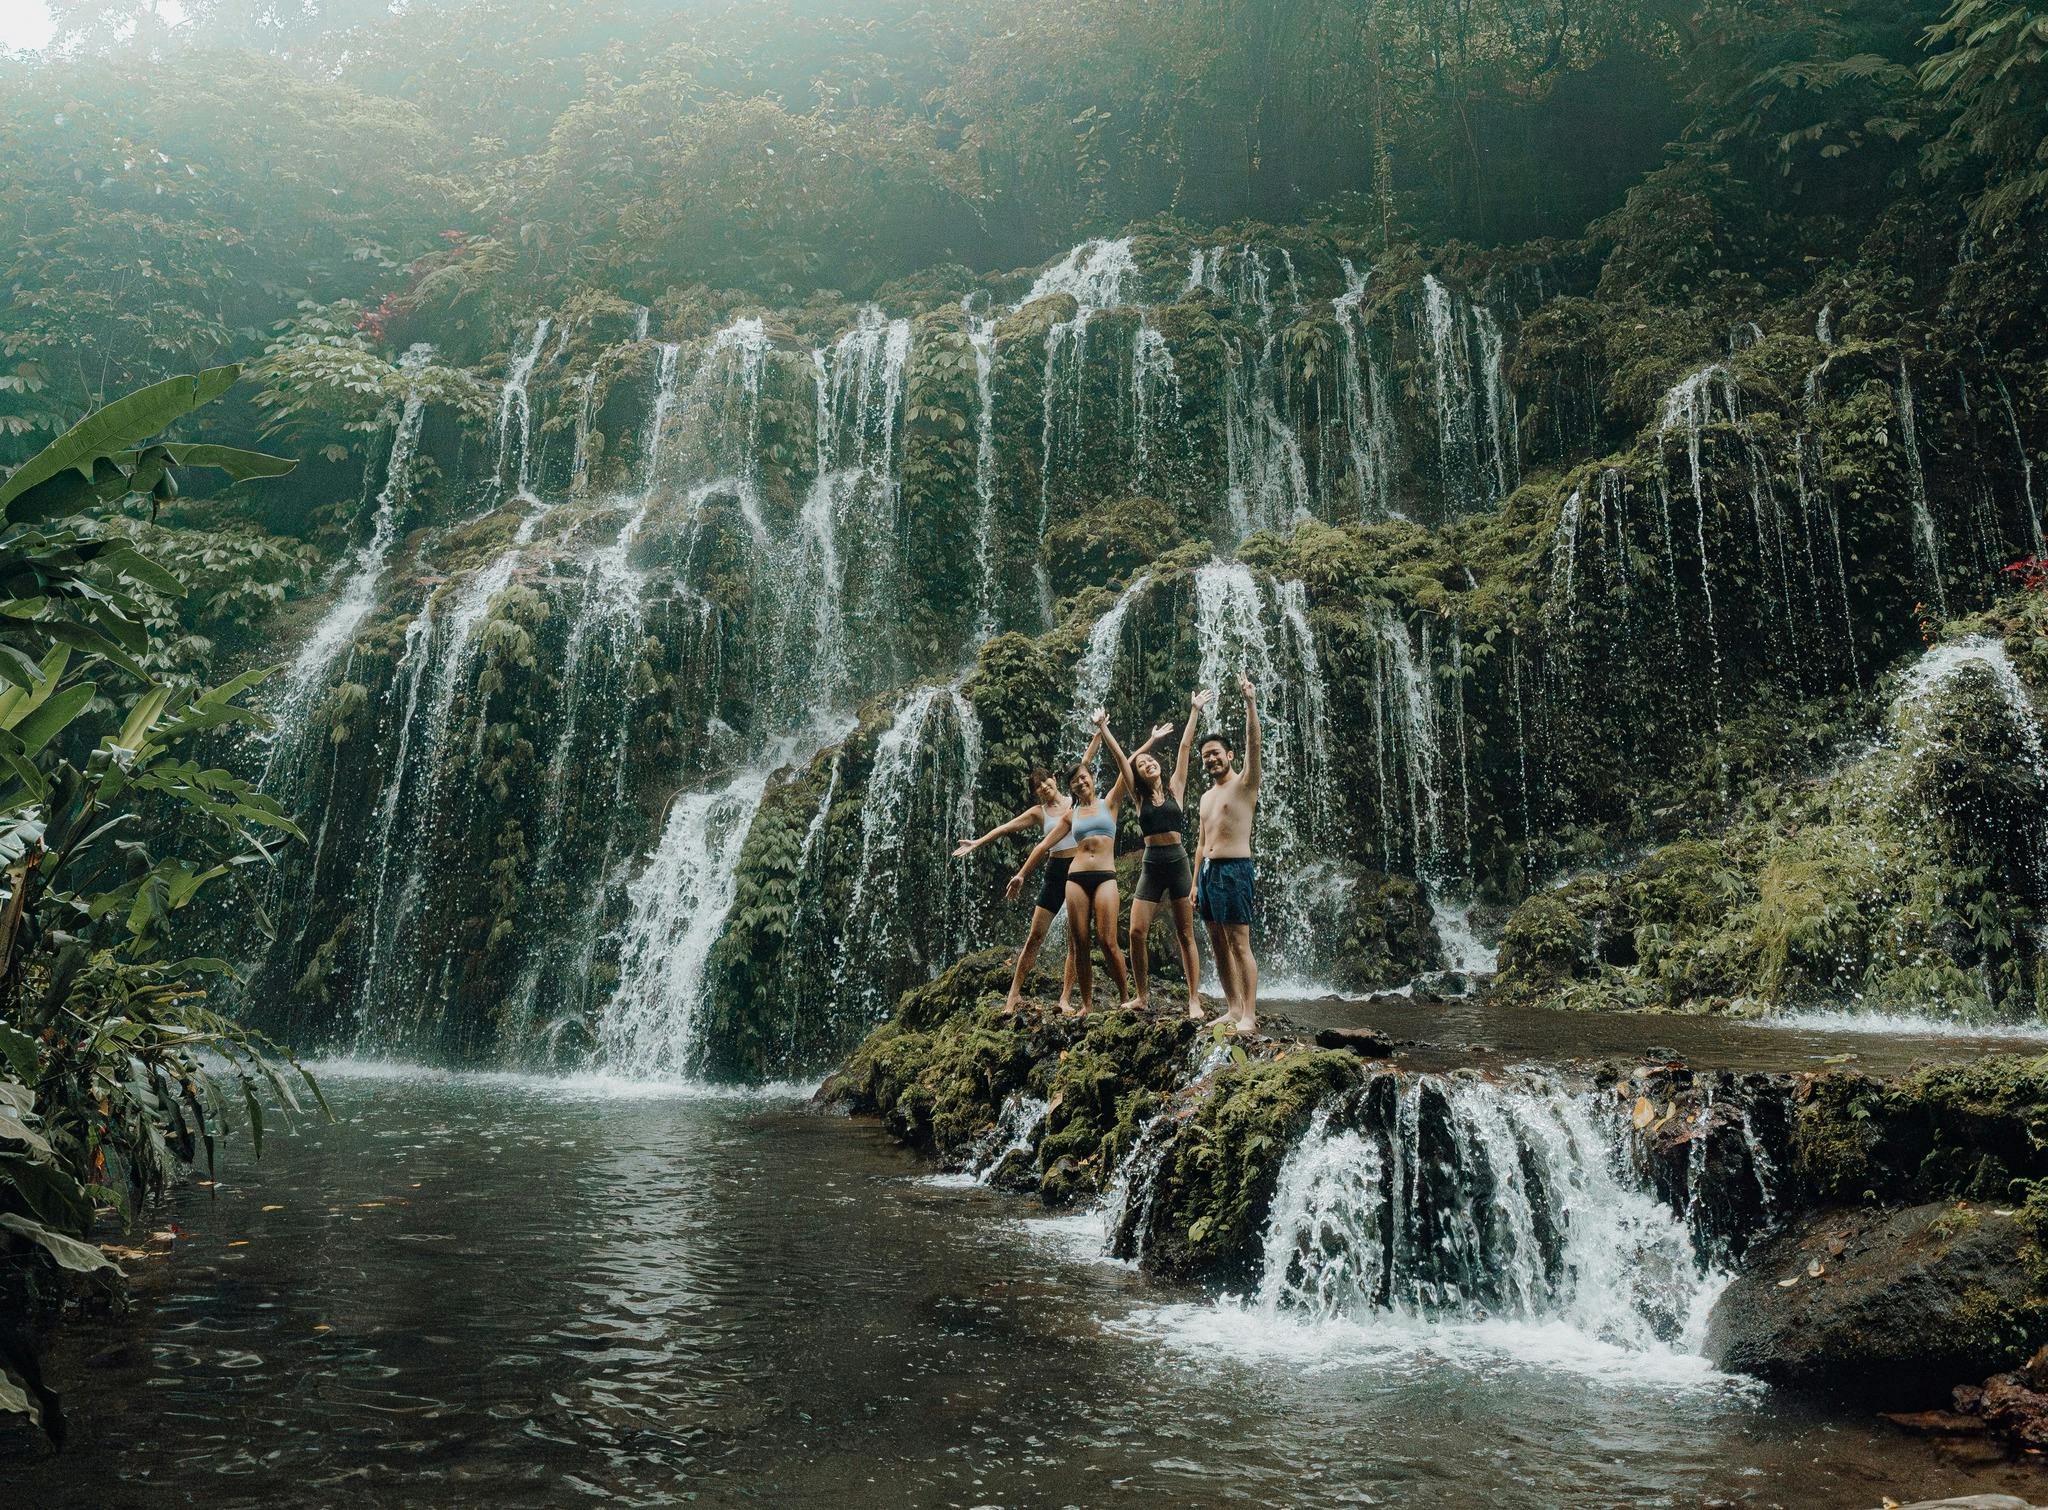 Munduk in North Bali is home to ancient forests and incredible waterfalls